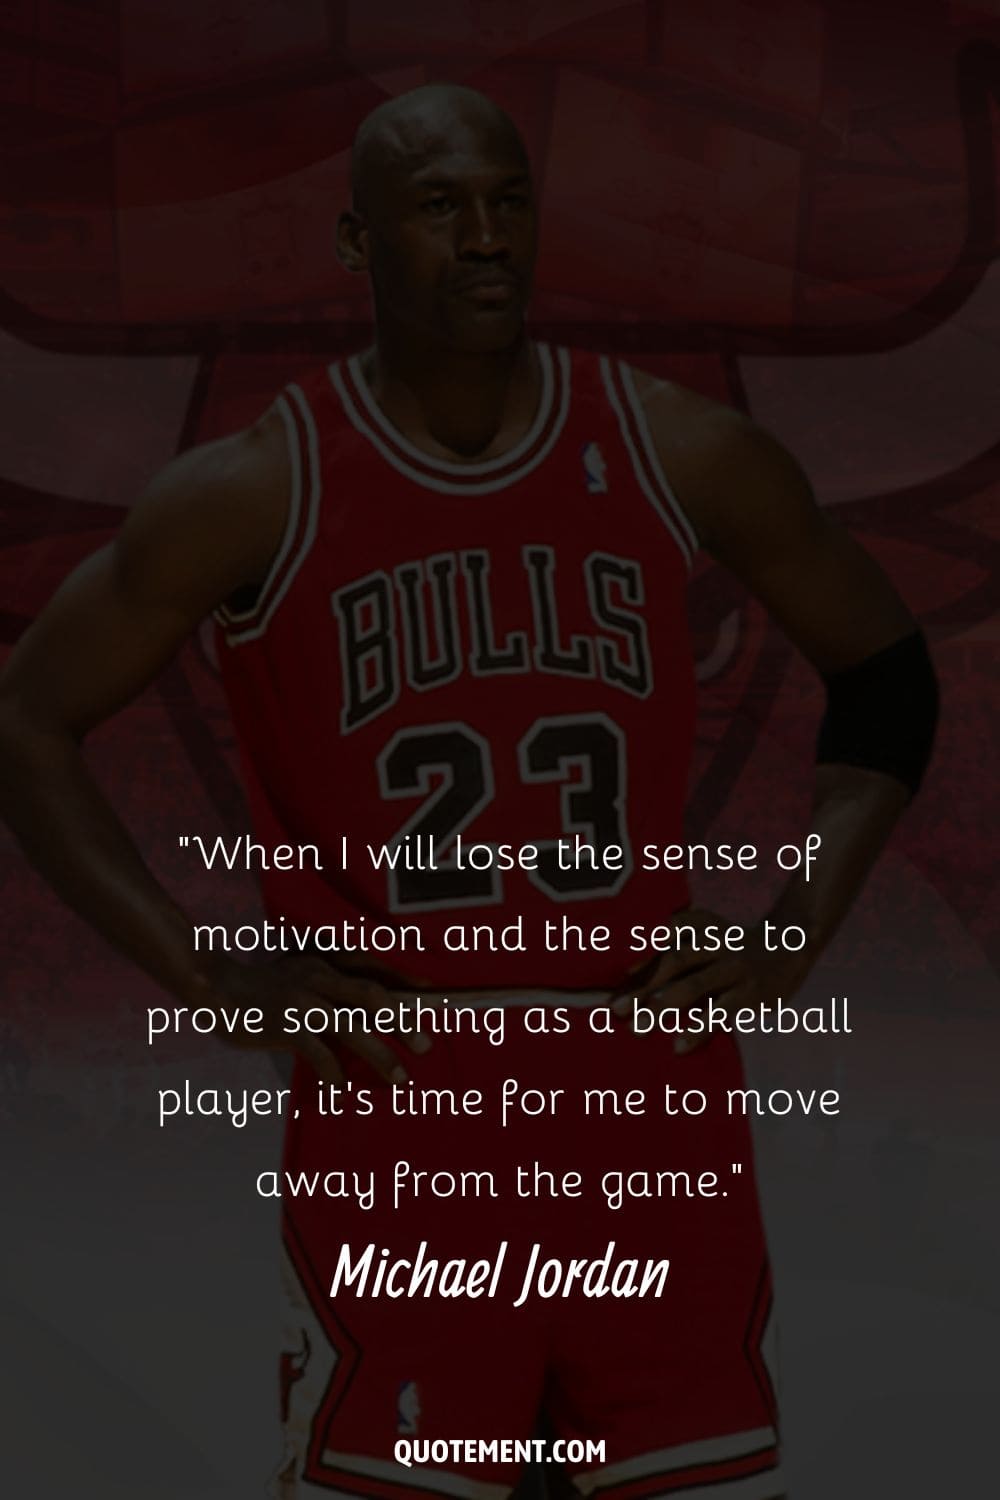 Michael Jordan stands with hands on hips representing famous quote by Michael Jordan